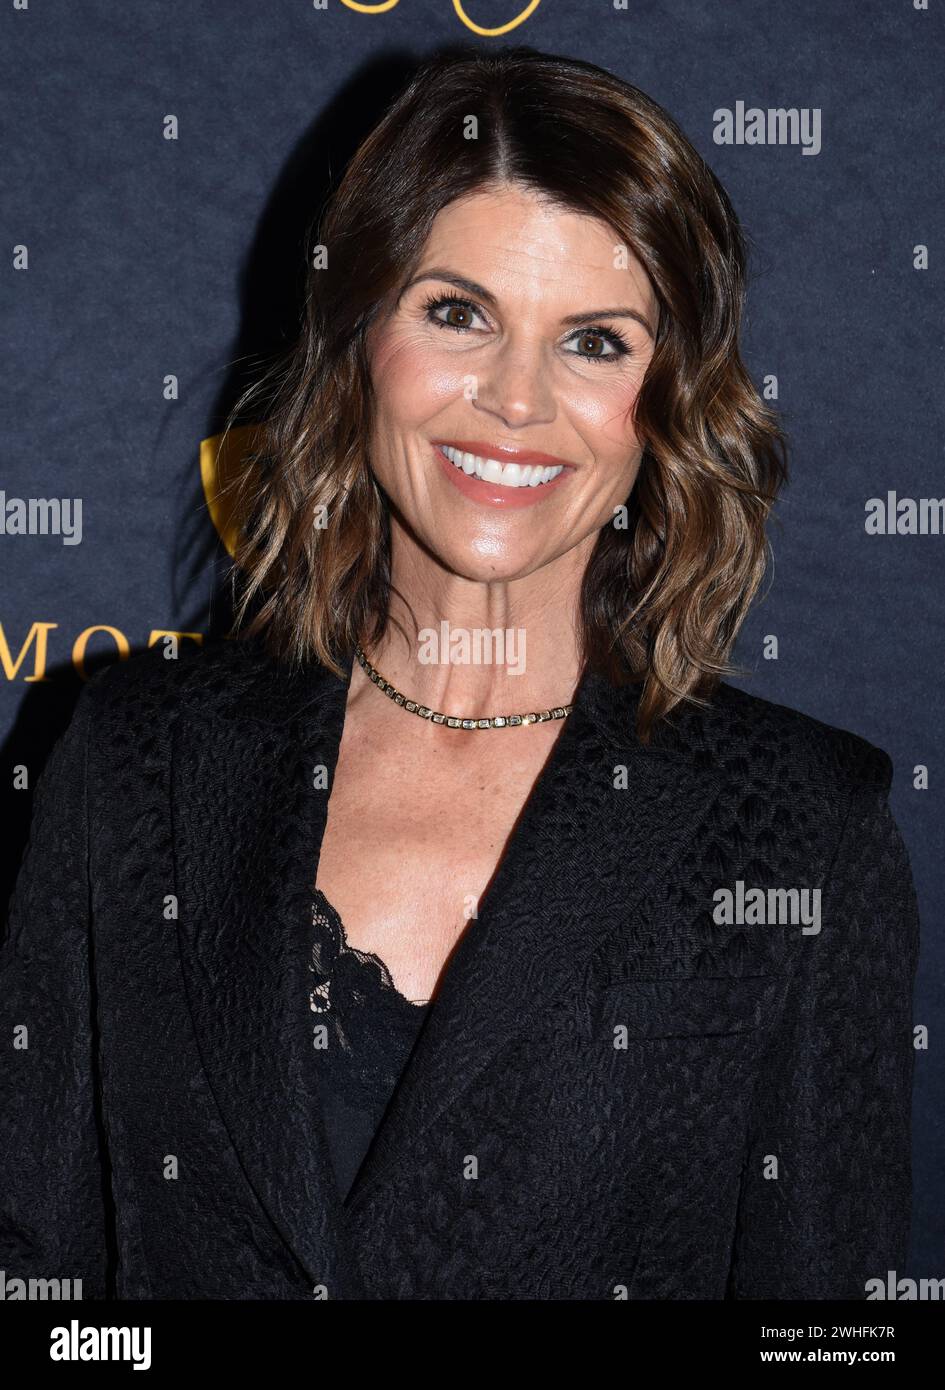 Los Angeles, California, USA 9th February 2024 Actress Lori Loughlin attends the 31st Annual MovieGuide Awards Gala at Avalon Hollywood & Bardot on February 9, 2024 in Los Angeles, California, USA. Photo by Barry King/Alamy Live News Stock Photo